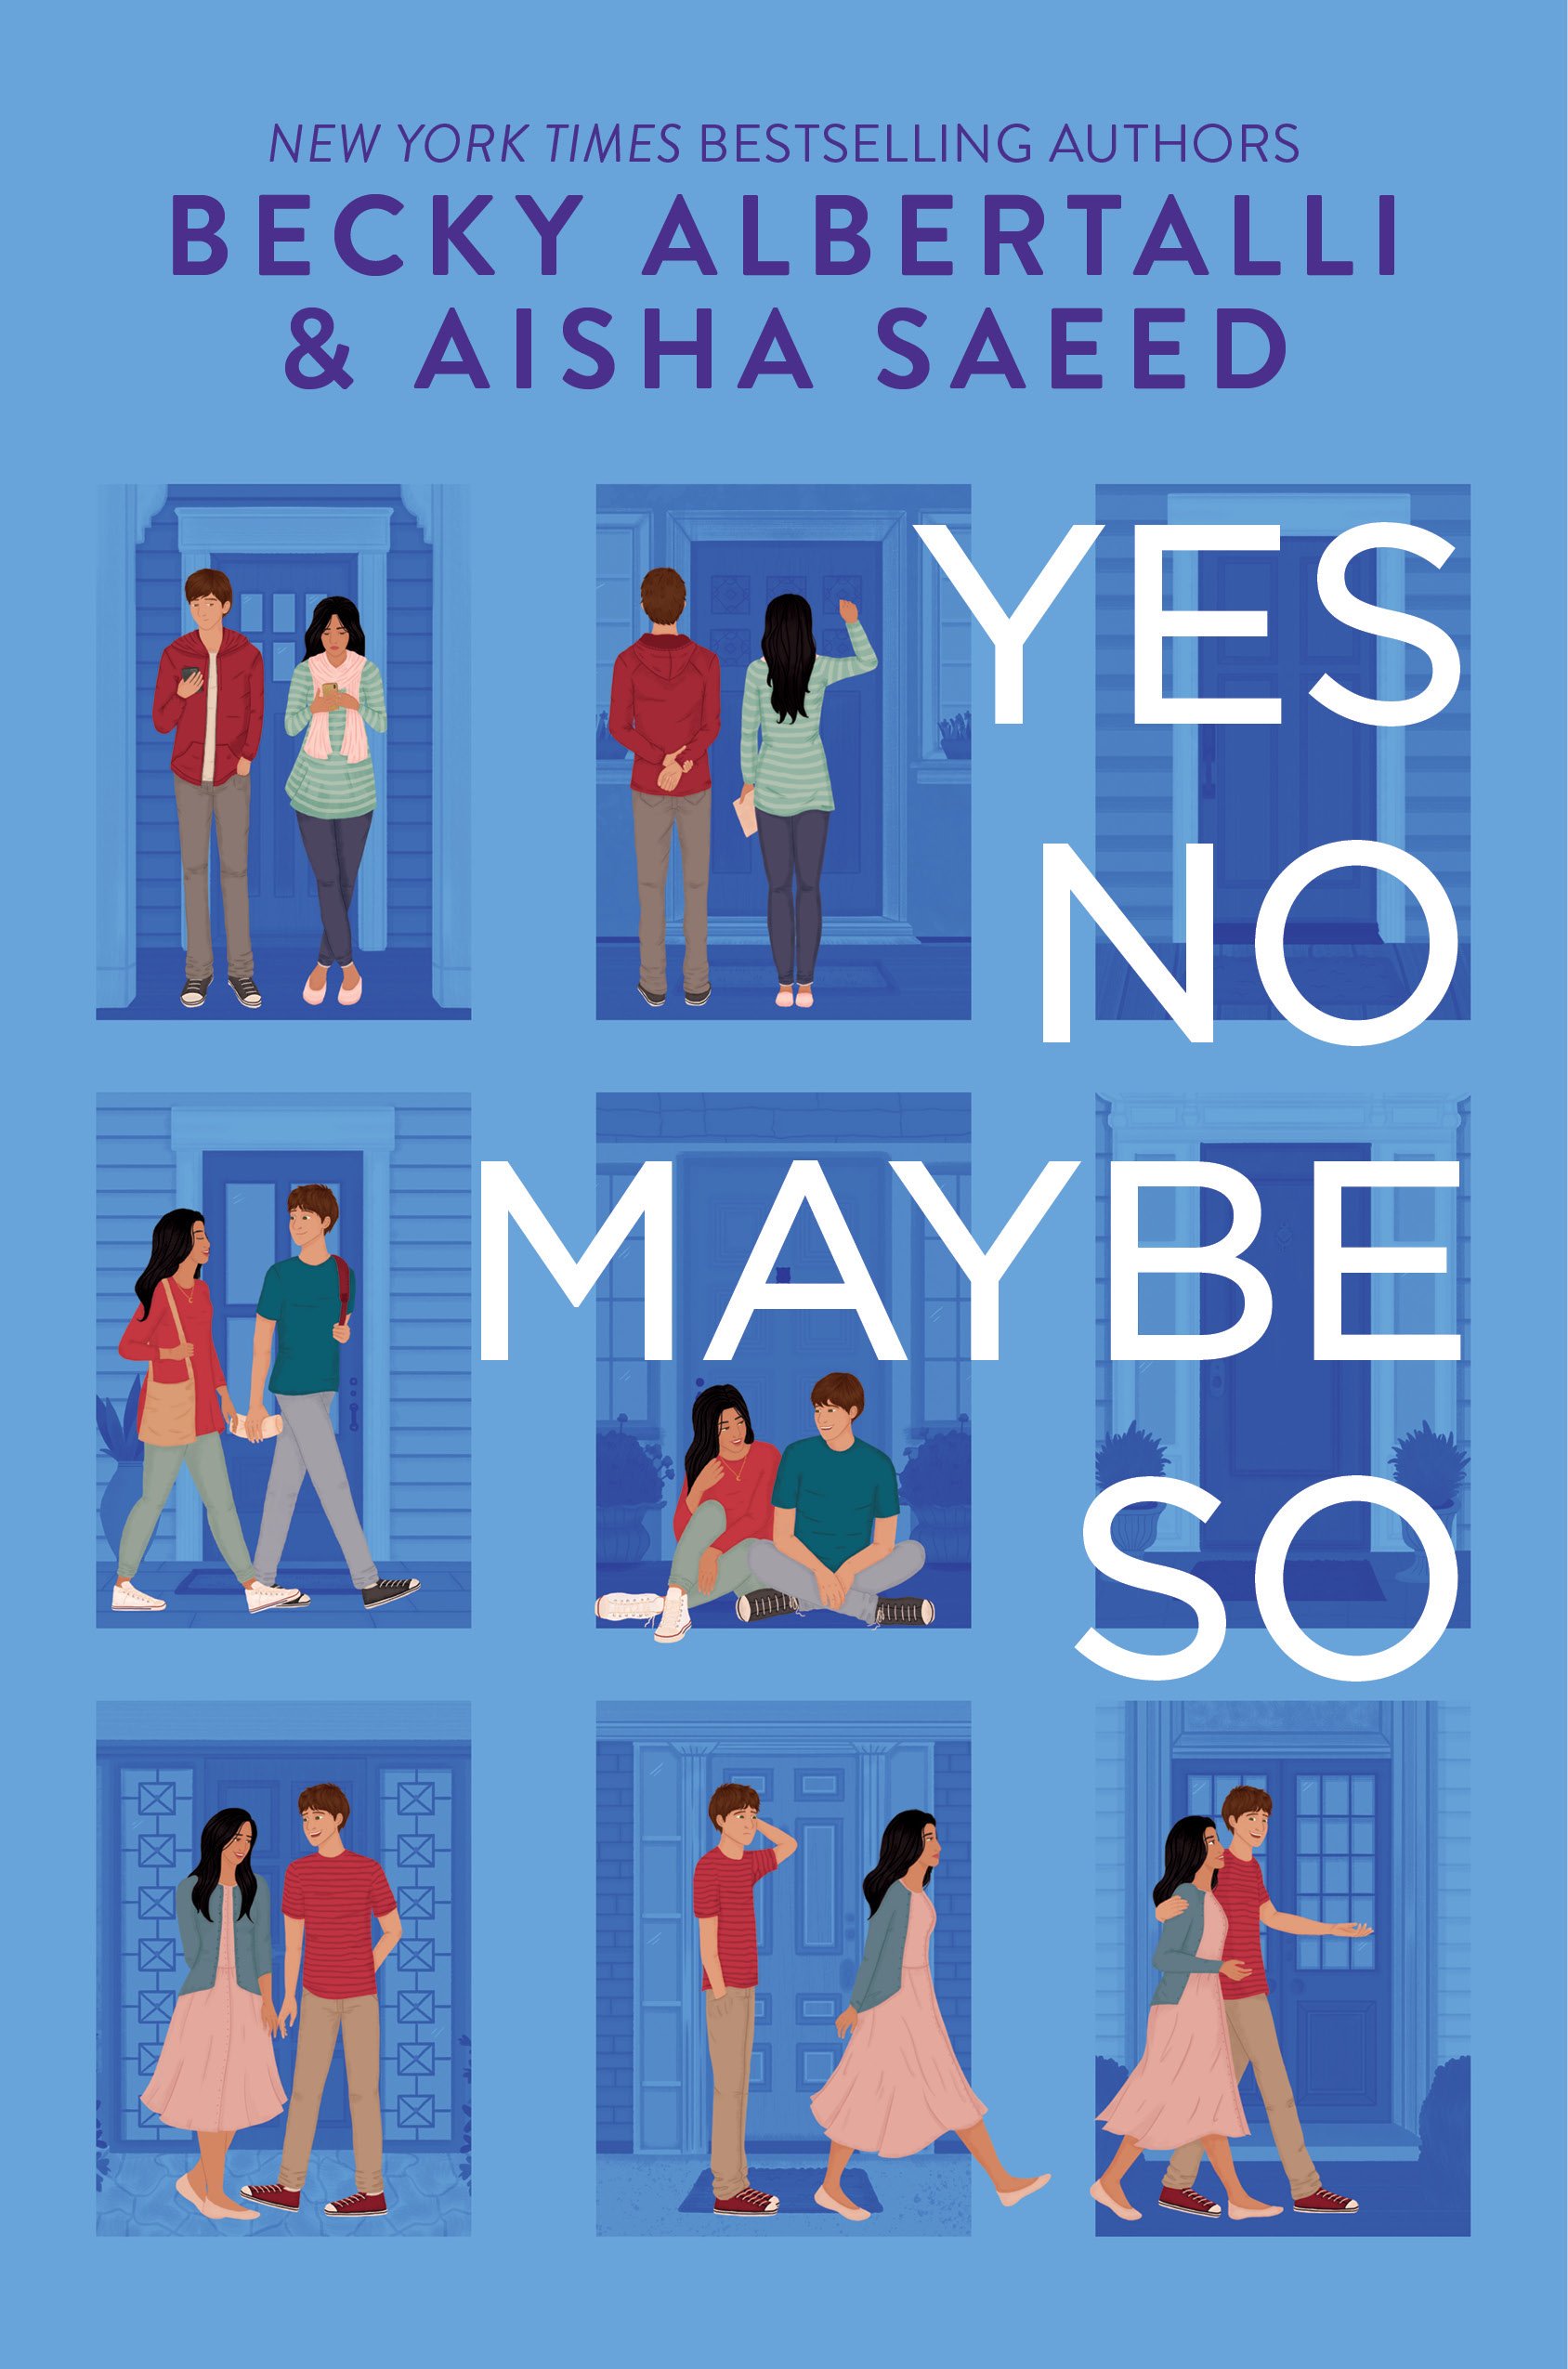 Yes No Maybe So by Becky Albertalli PDF Download